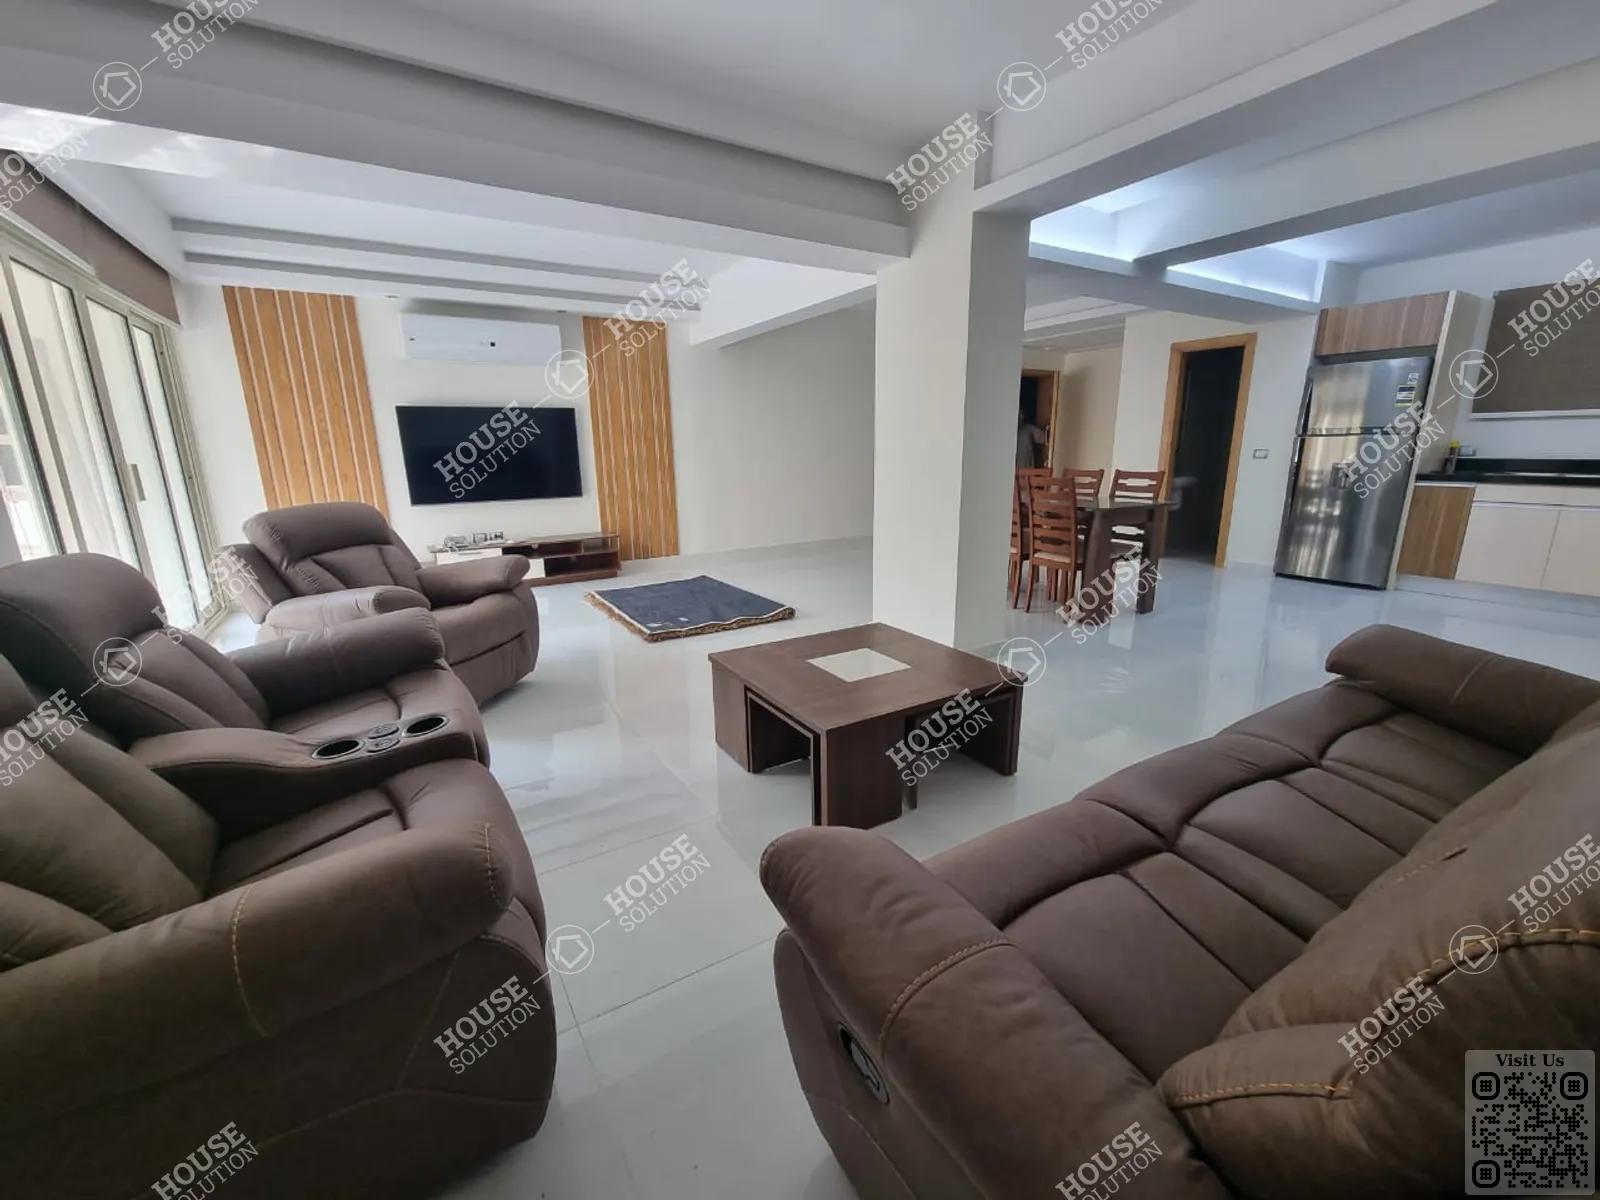 RECEPTION  @ Apartments For Rent In Maadi Maadi Sarayat Area: 145 m² consists of 2 Bedrooms 2 Bathrooms Modern furnished 5 stars #5758-2